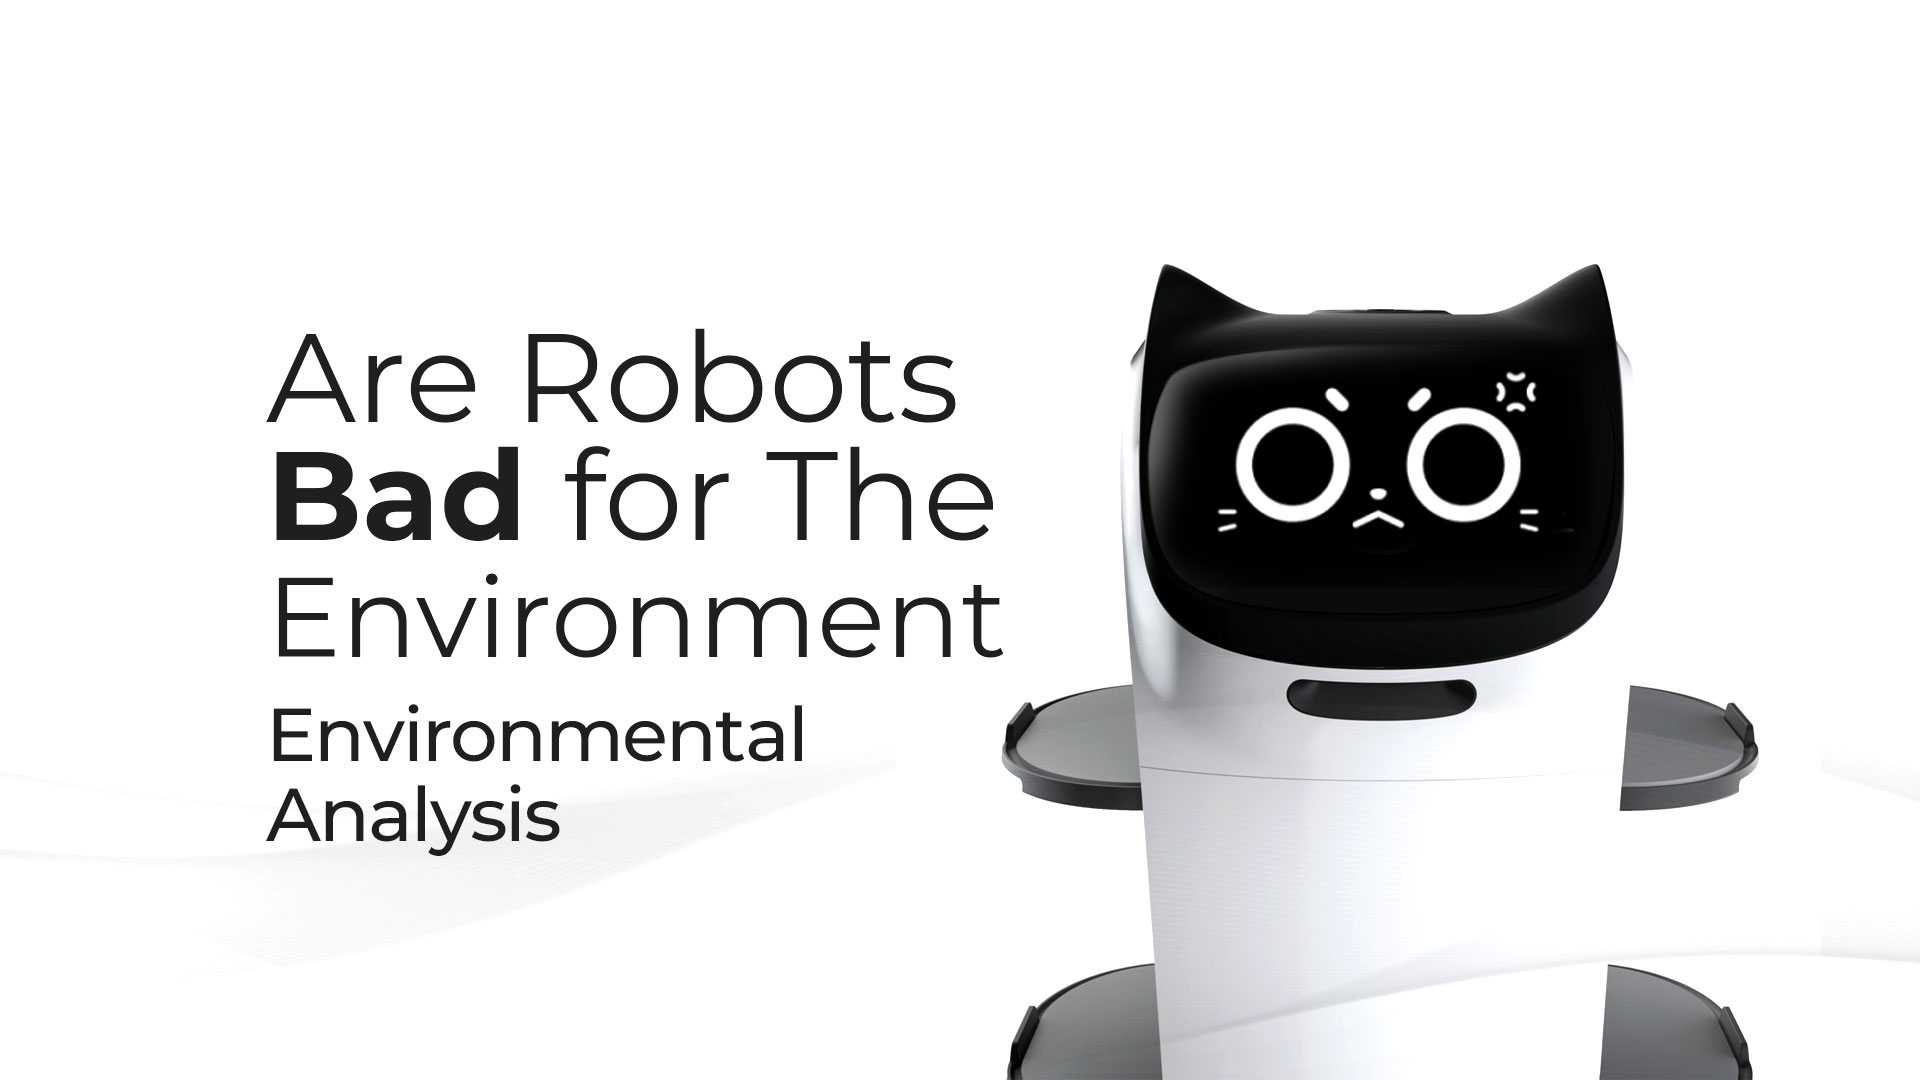 Are robots bad for the environment